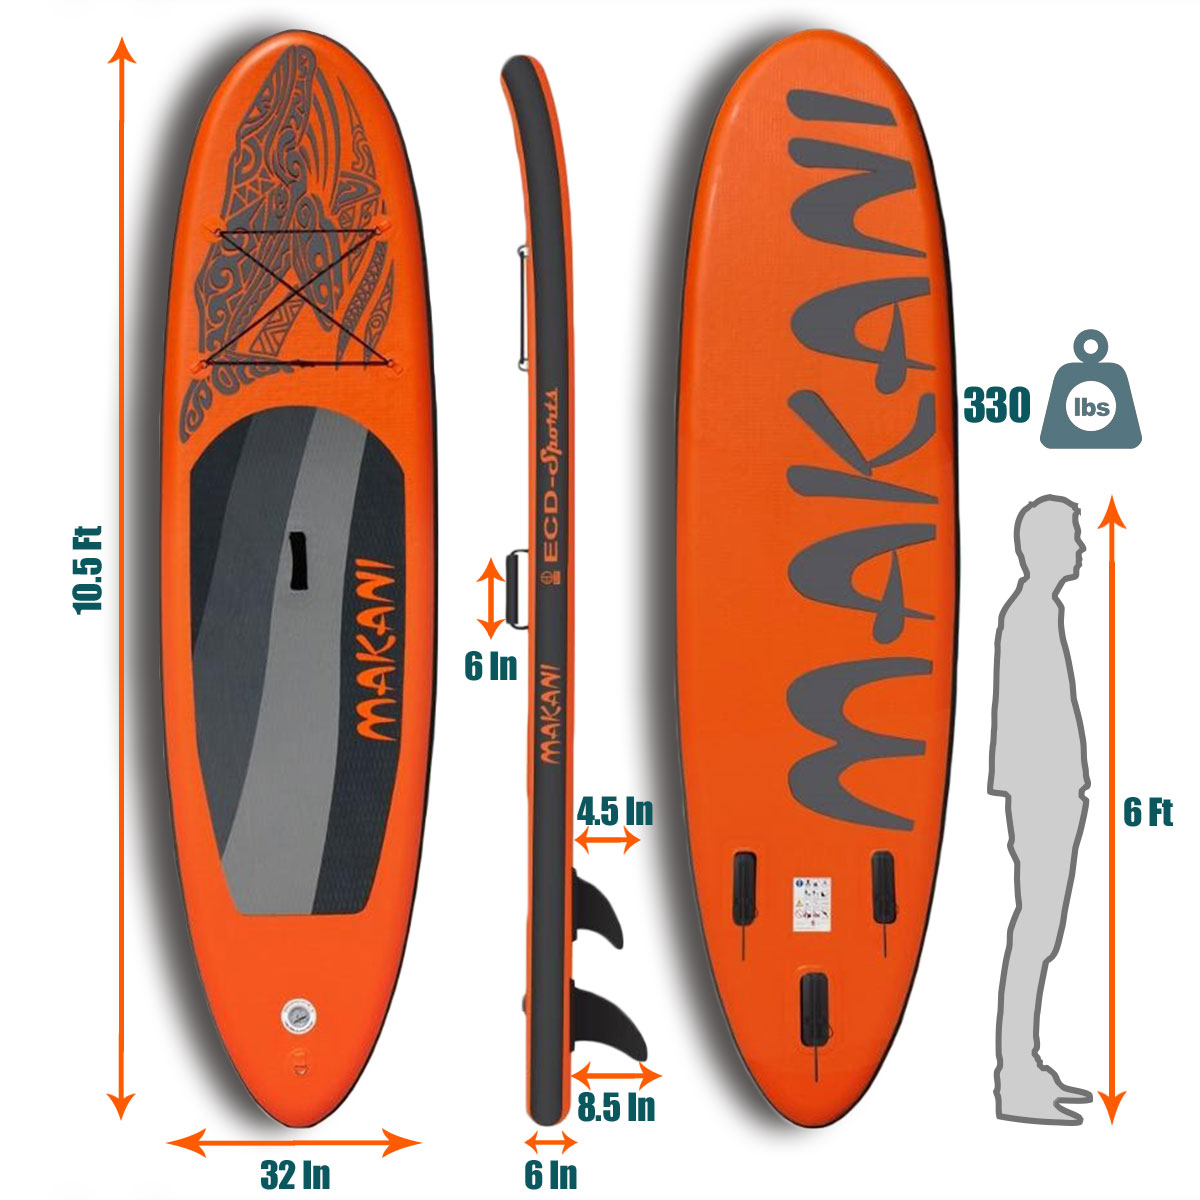 TGO Gear 10.5' iSUP Inflatable Stand Up Paddle Board - All-Around Versatility, Anti-Slip Deck, 3 Fins - Includes Pump, Leash, Backpack, Repair Kit - Orange Mako